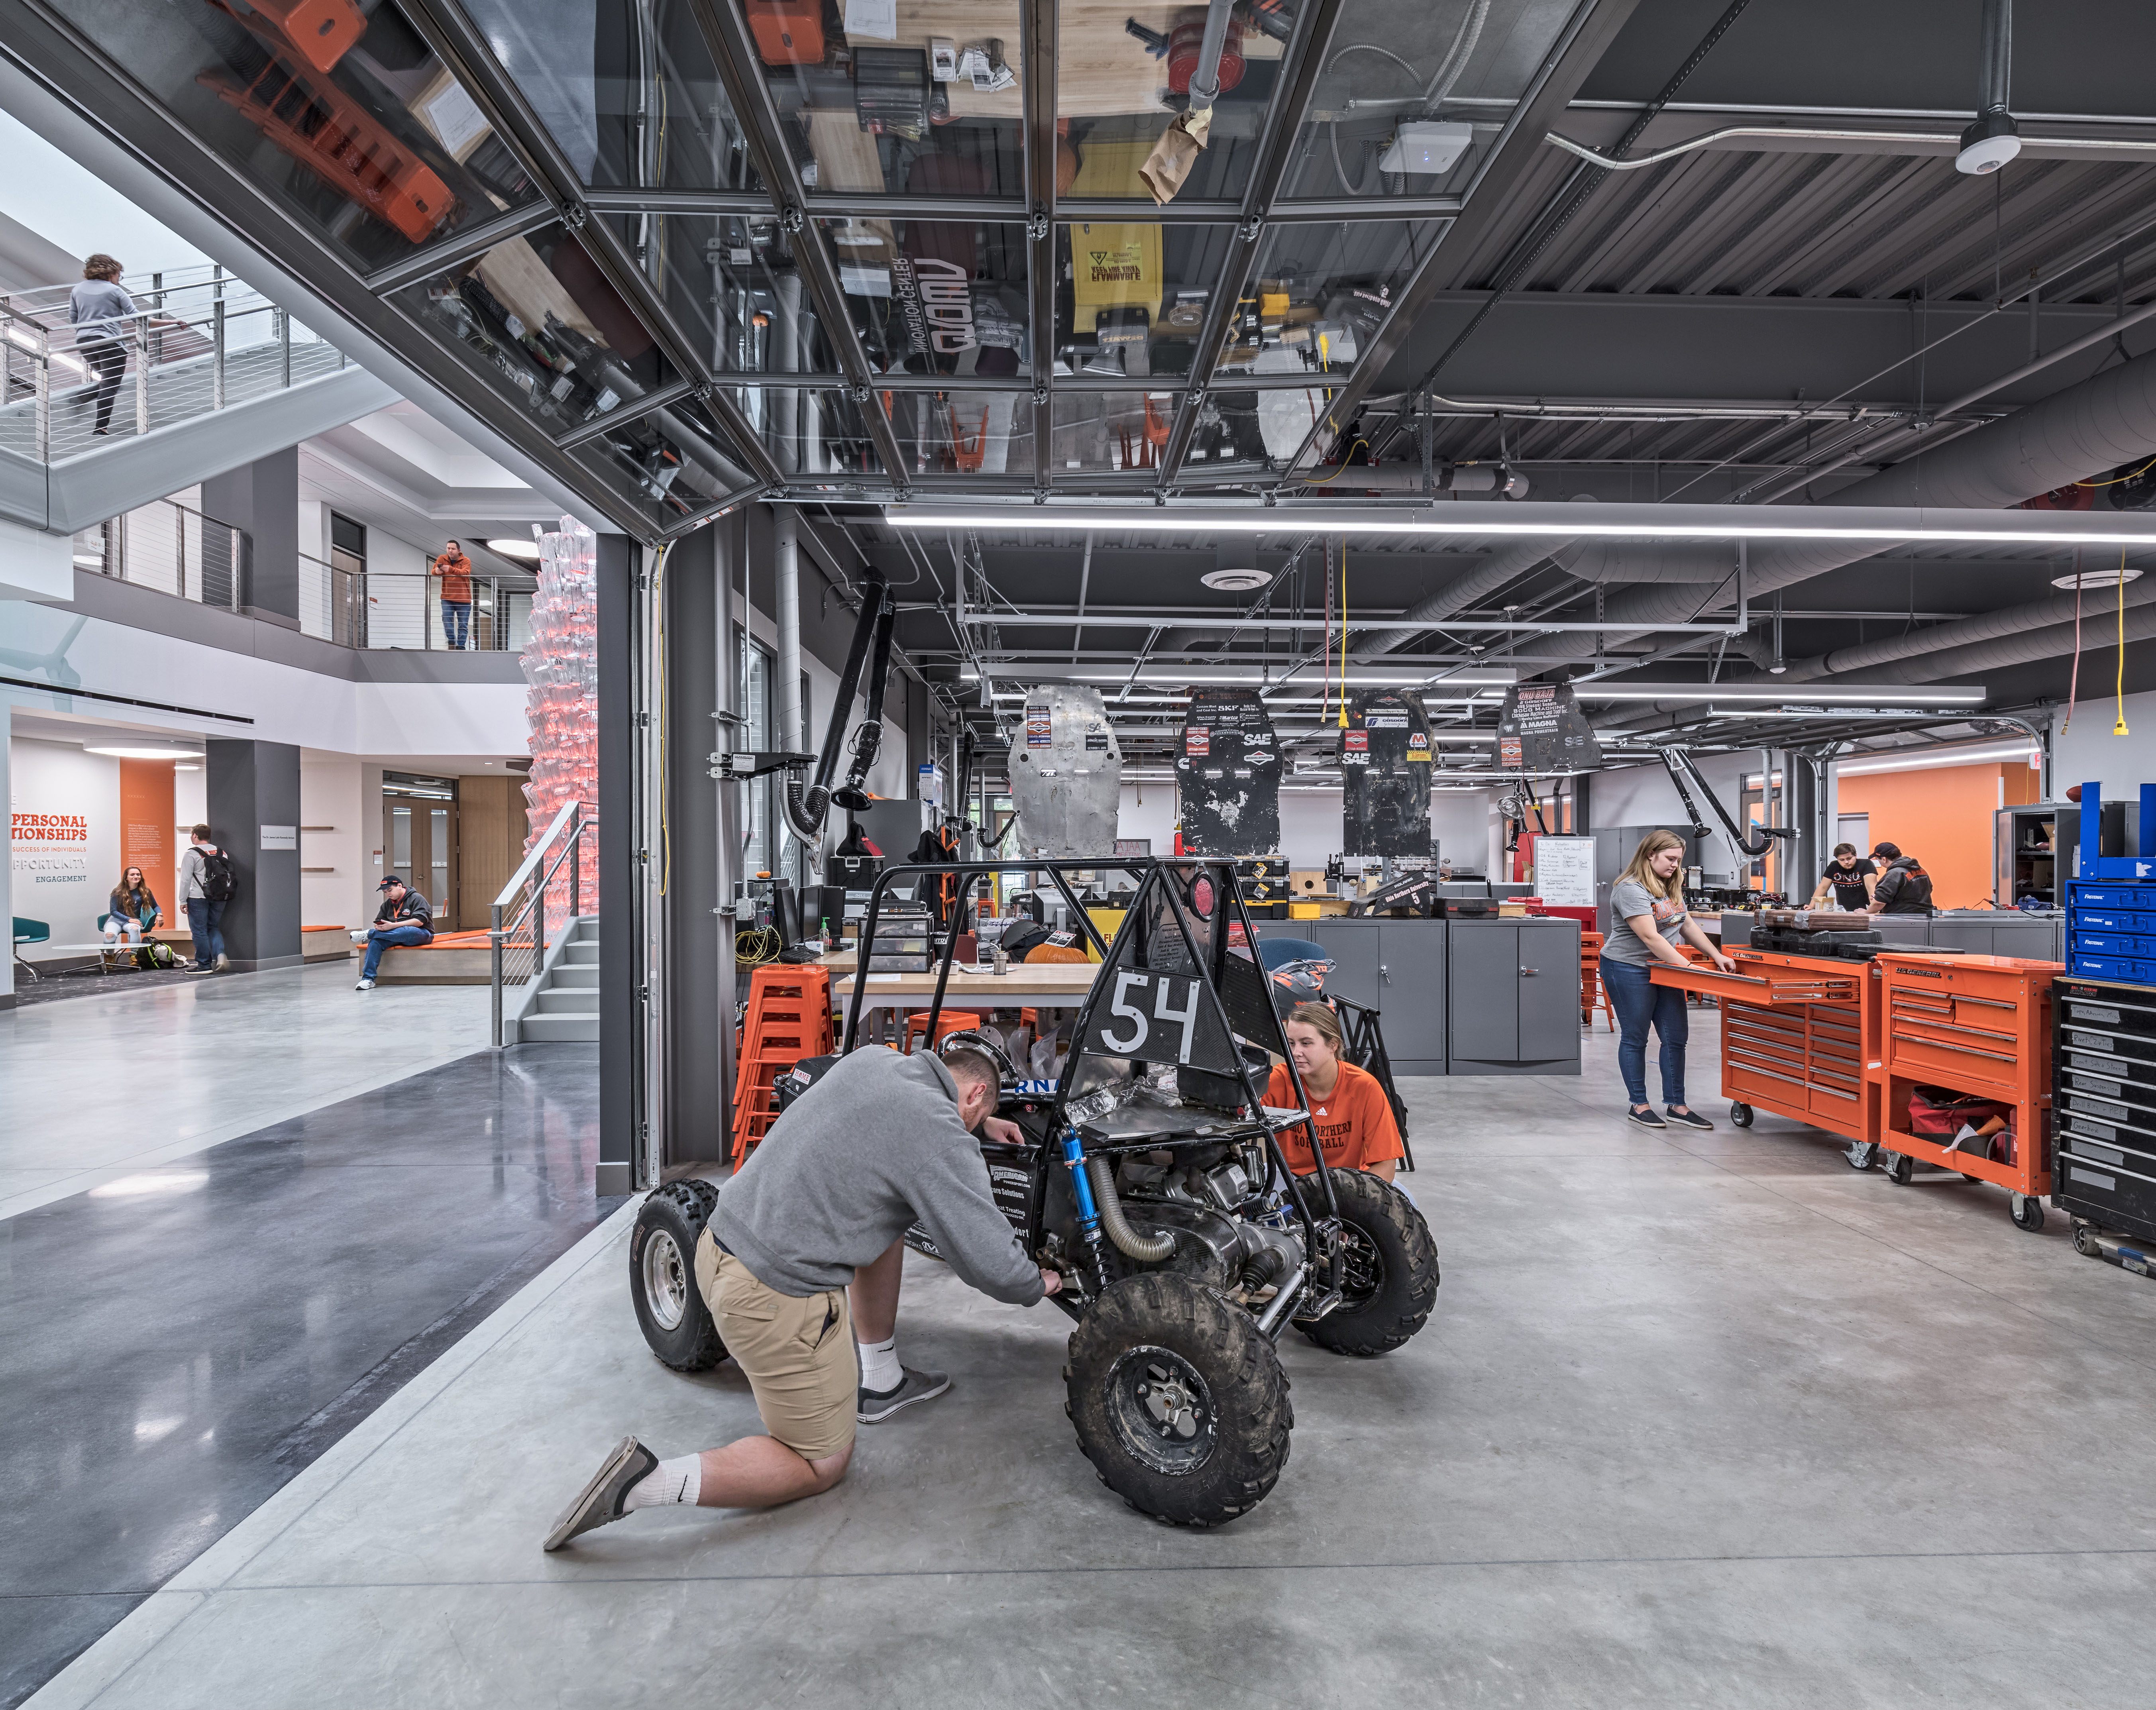 Moveable garage doors inside student studios allow visibility into the atrium 